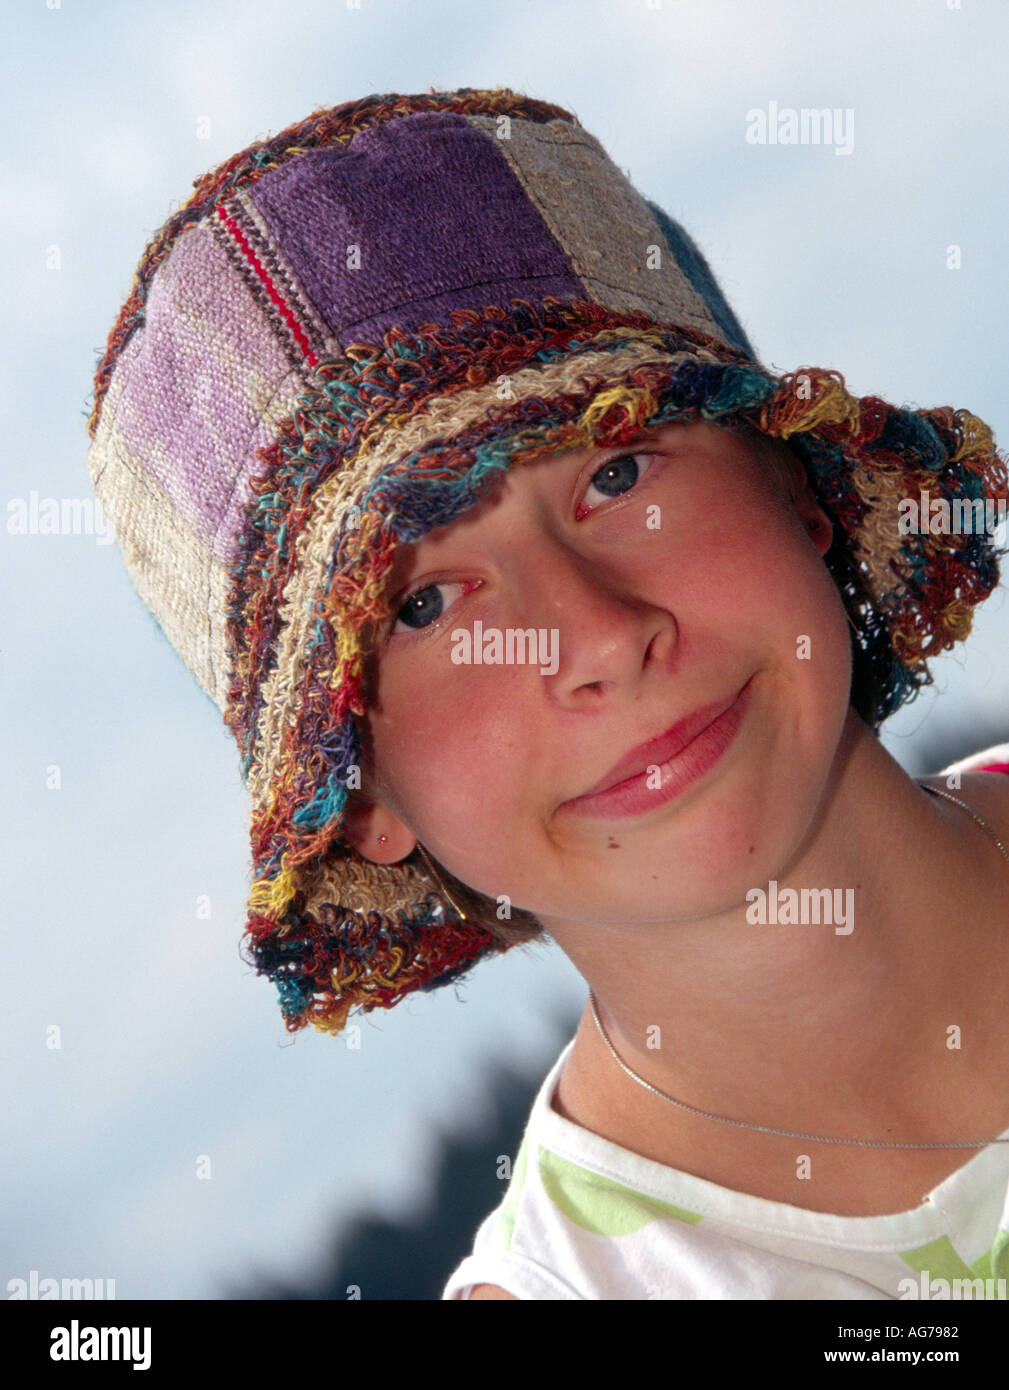 a frustrated girl with a hat Stock Photo